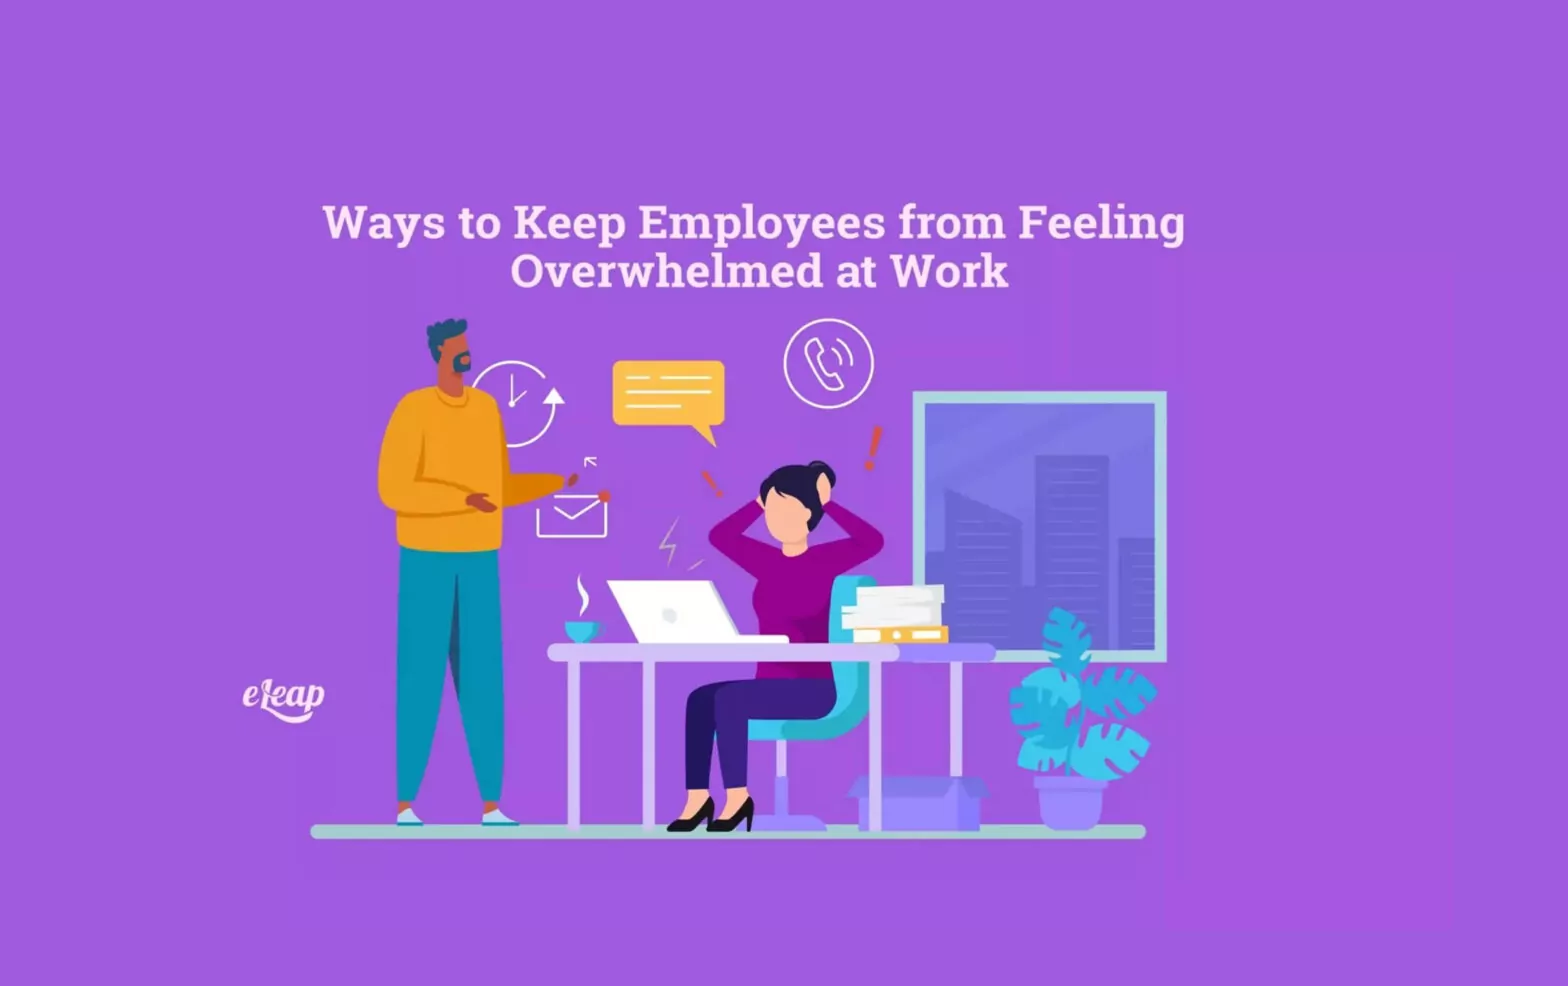 Ways to Keep Employees from Feeling Overwhelmed at Work